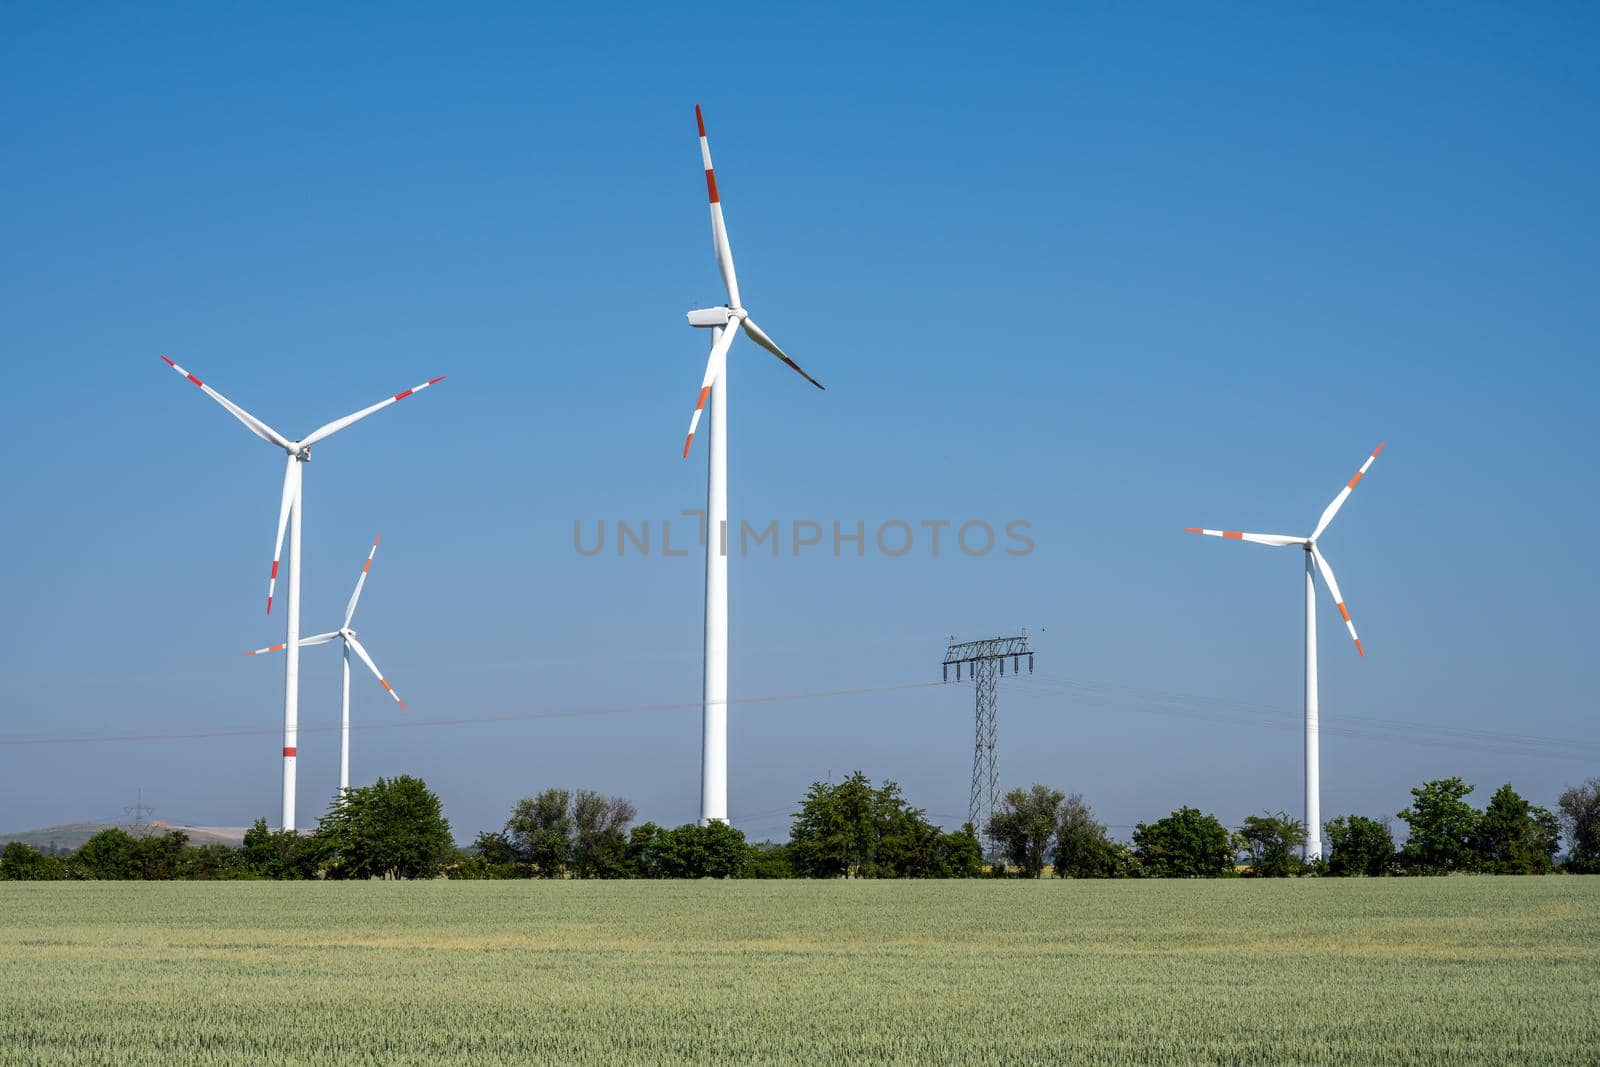 Wind turbines and an electric power line seen in Germany